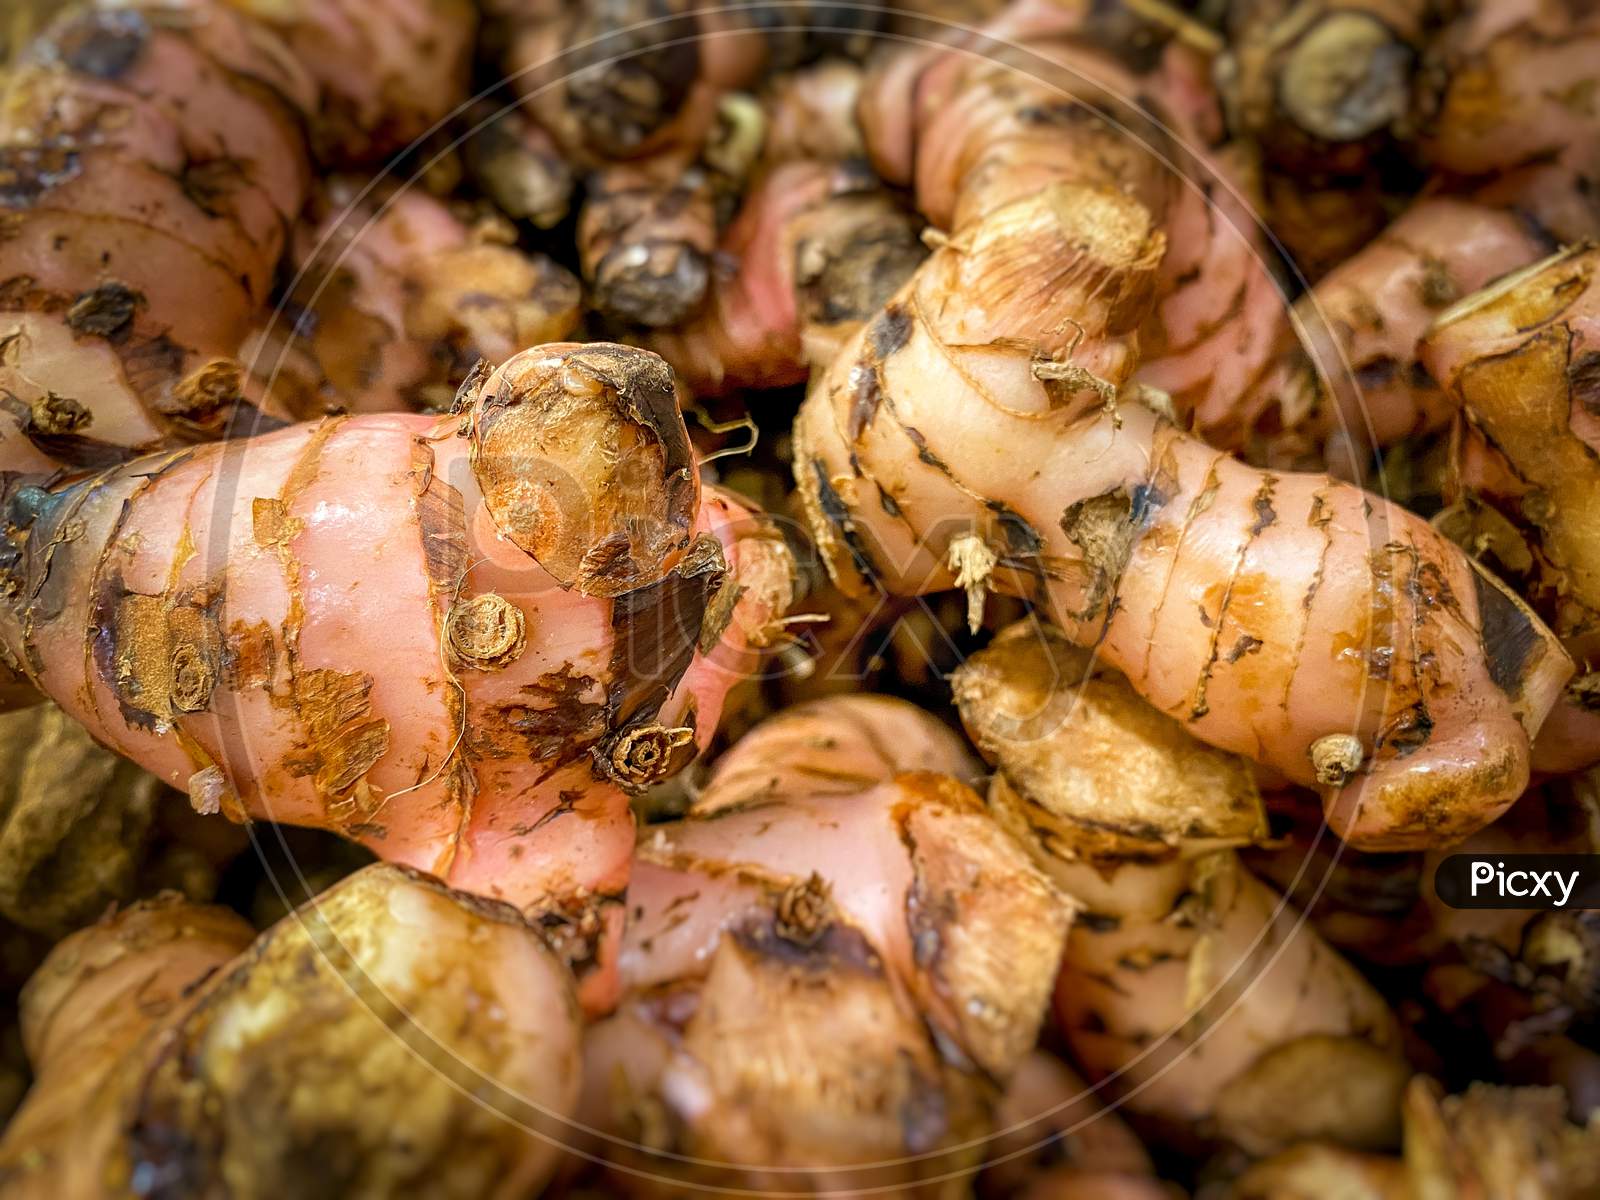 Raw Spices Galangal From The Traditional Market